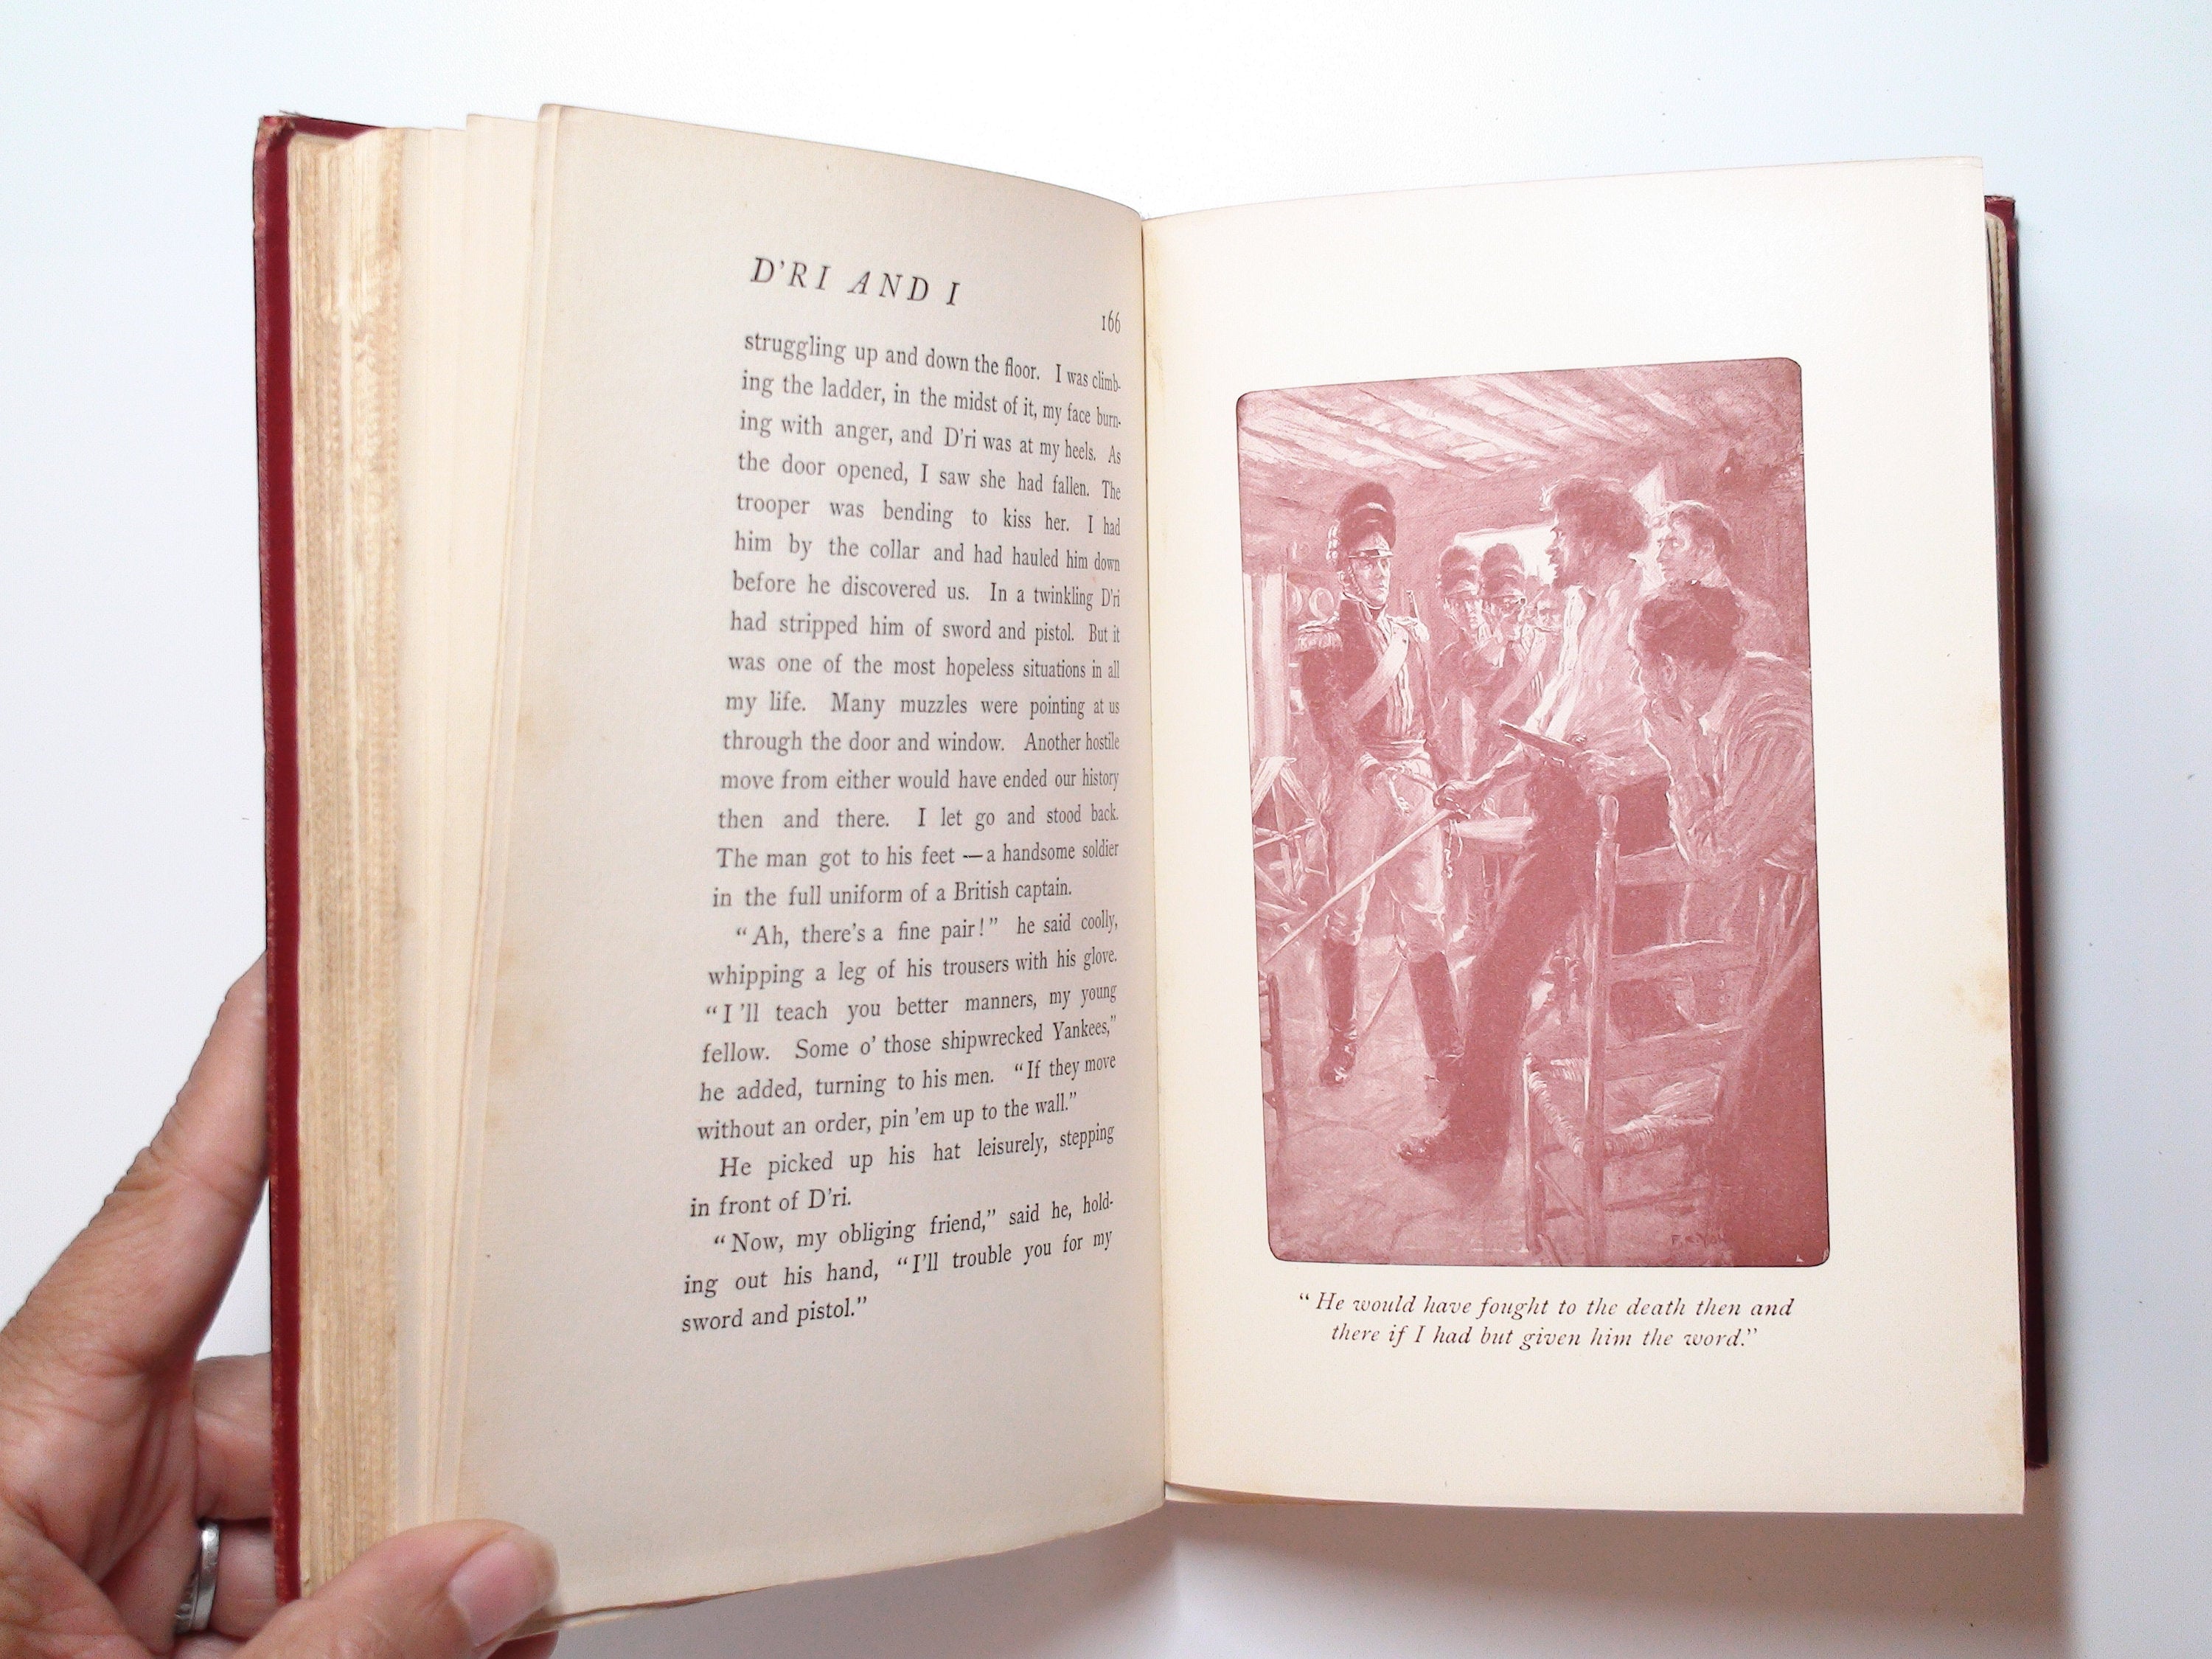 D'ri and I, by Irving Bacheller, Illustrated by F. C. Yohn, 1st Ed, 1901